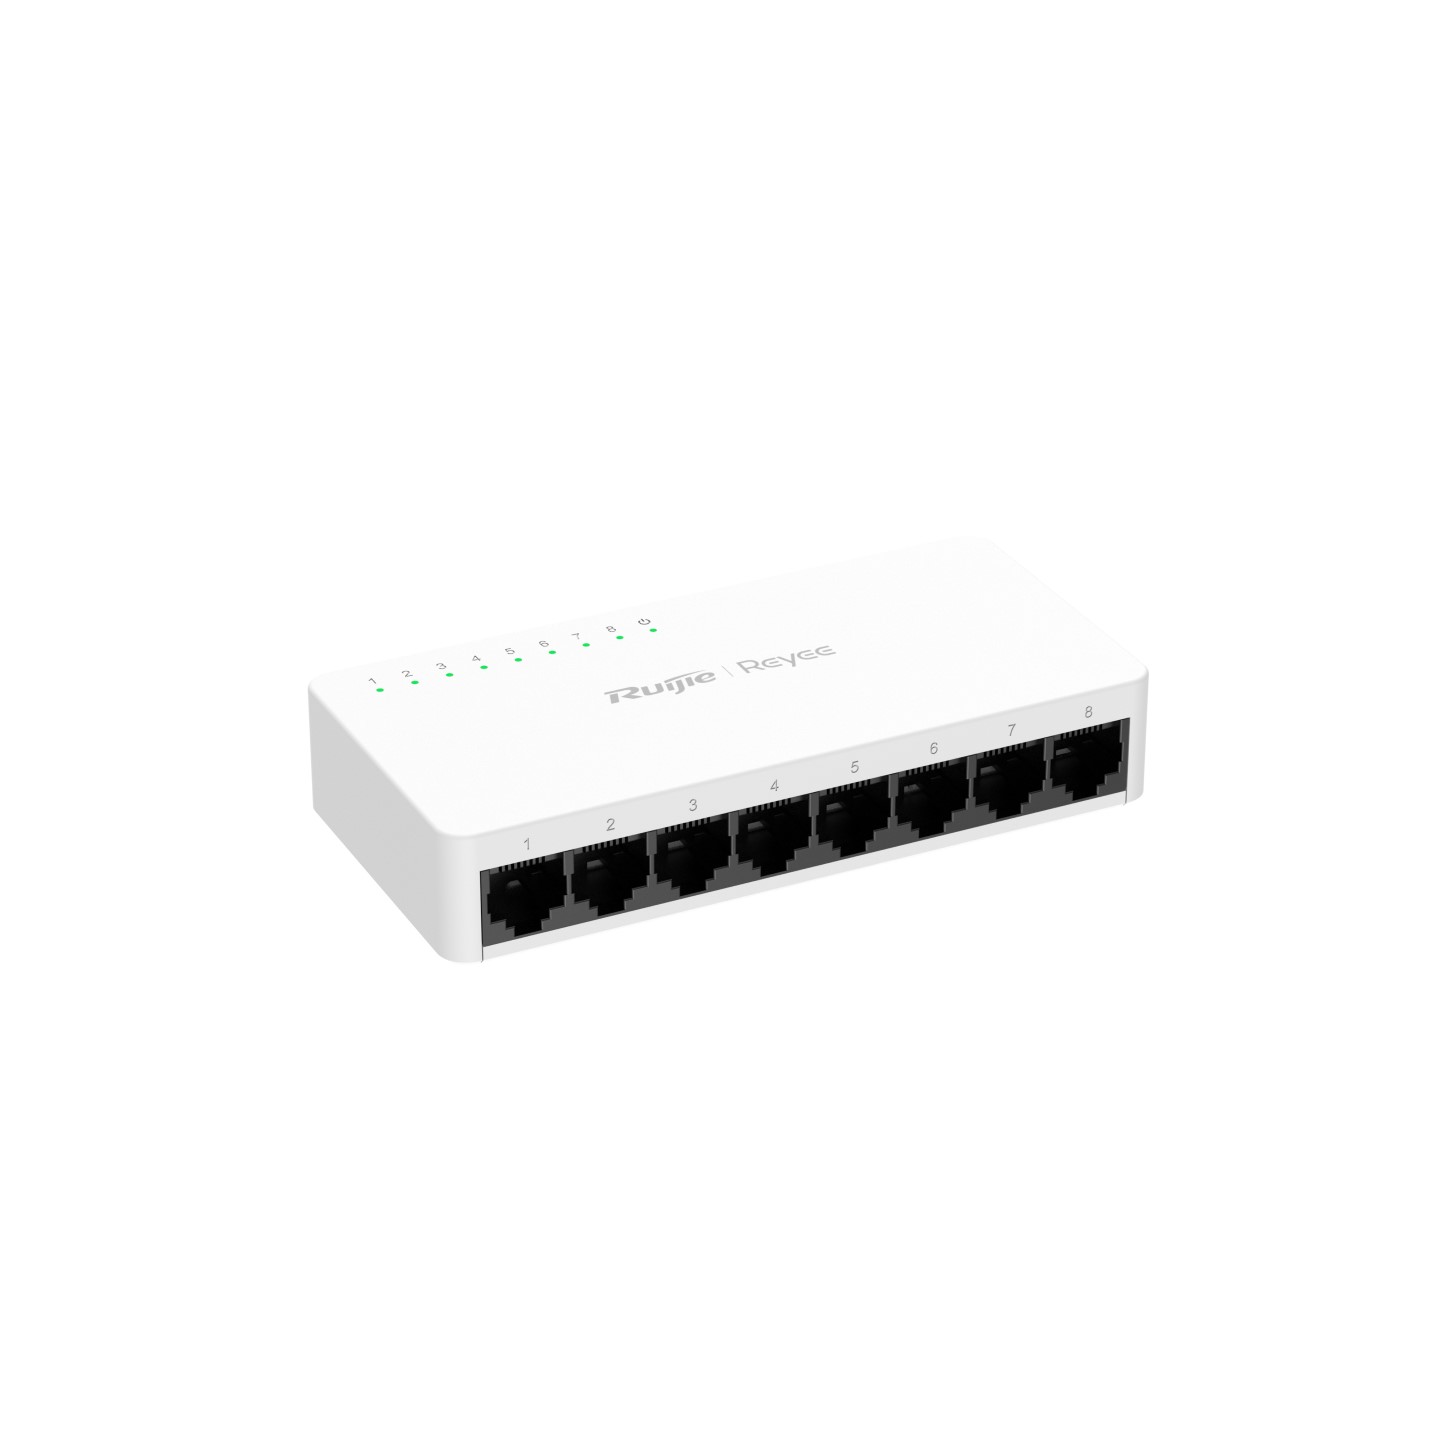 RG-ES08G-L, 8-Port 10/100/1000 Mbps Unmanaged Non-PoE Switch - Ruijie Reyee